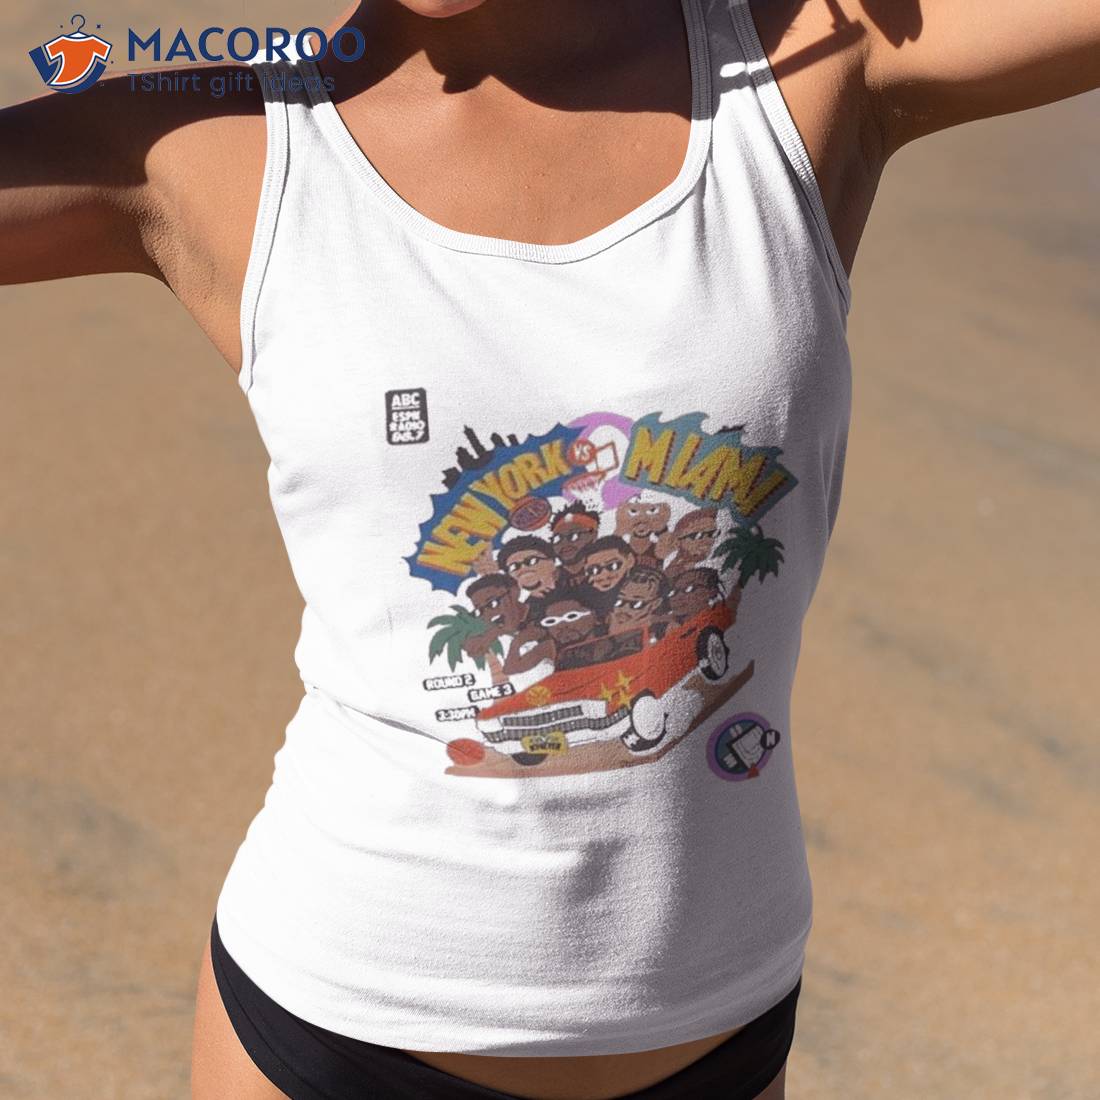 https://images.macoroo.com/wp-content/uploads/2023/05/new-york-knicks-vs-miami-road-to-round-2-game-3-shirt-tank-top-2.jpg